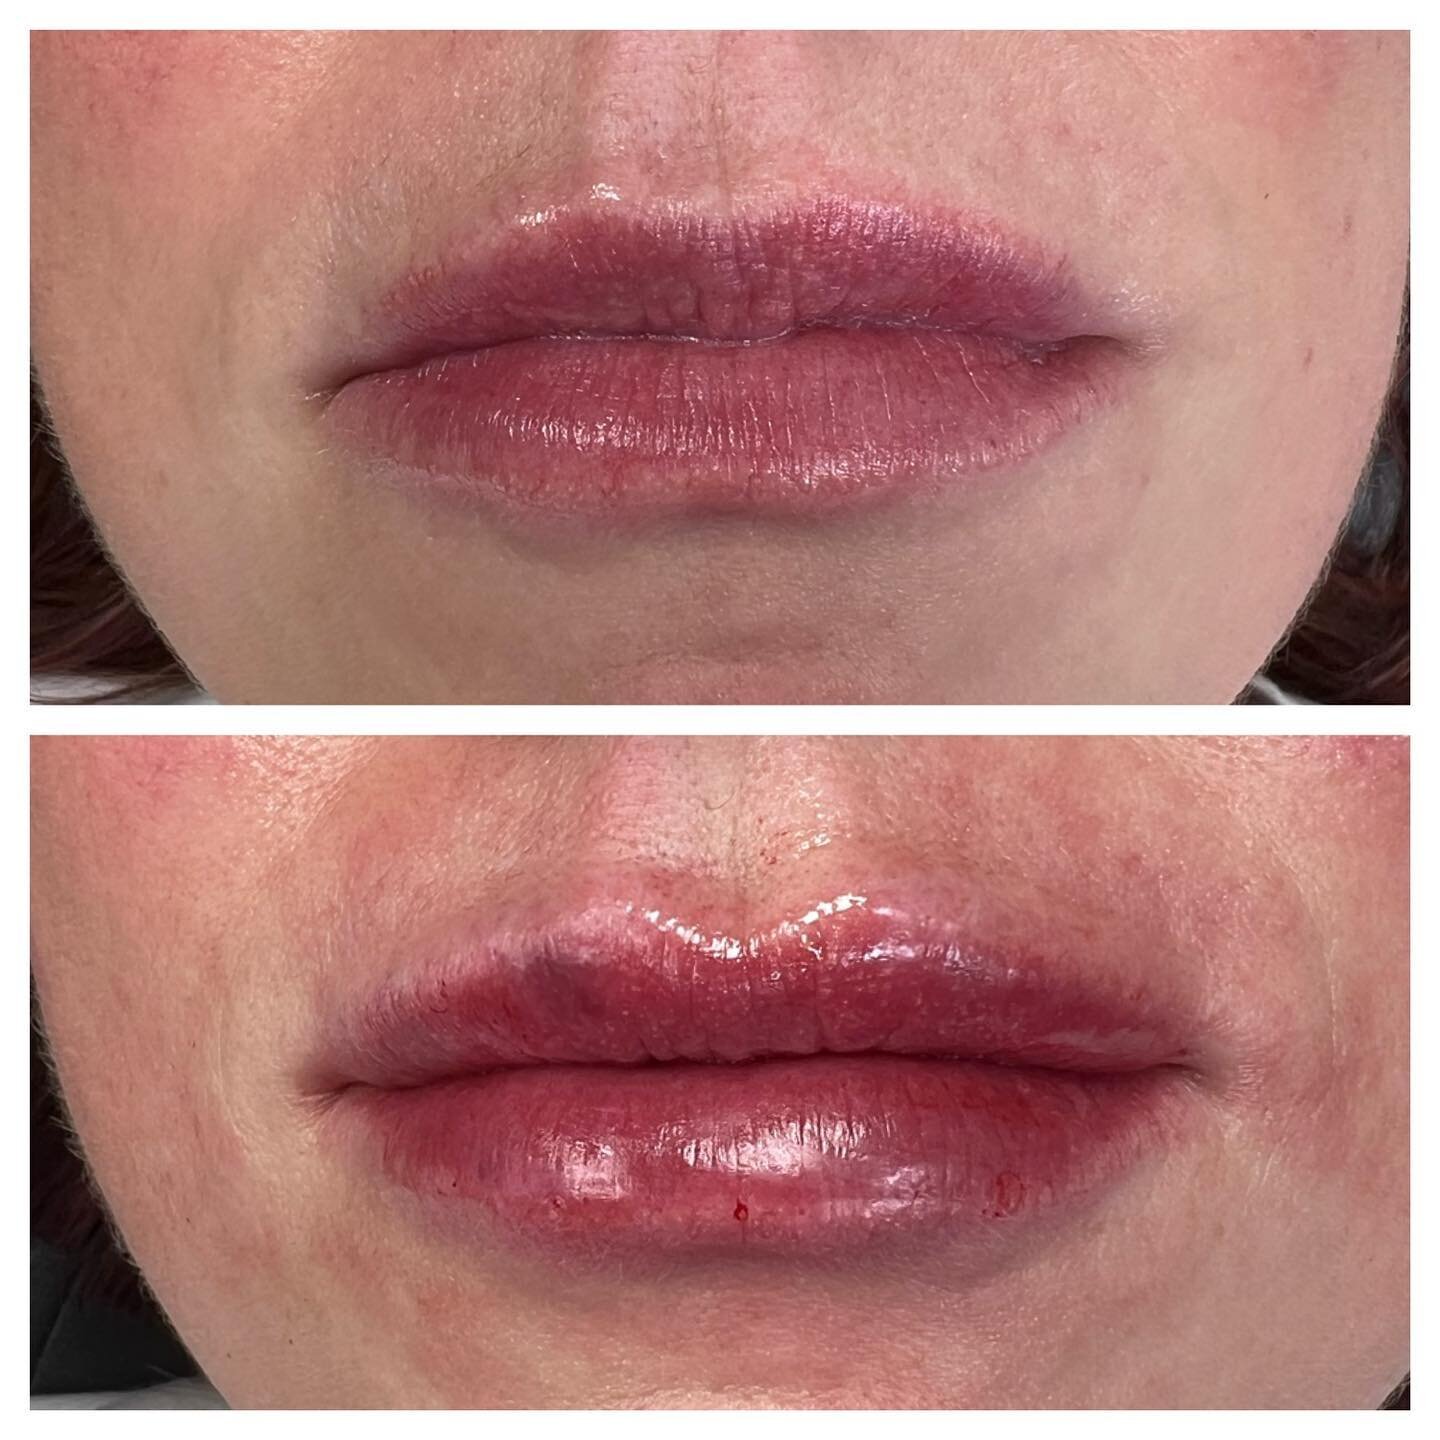 &ldquo;Roxi, I really want a defined border.&rdquo; Well, here you go sister 😊💋💋💋 #lips #lip #lipfiller  #lips #lipfiller #lipflip #lipinjections #lipinjectors #lipaugmentation #lipartist #liplove #lipart #pout #poutylips #lipstick
#utah #saltlak